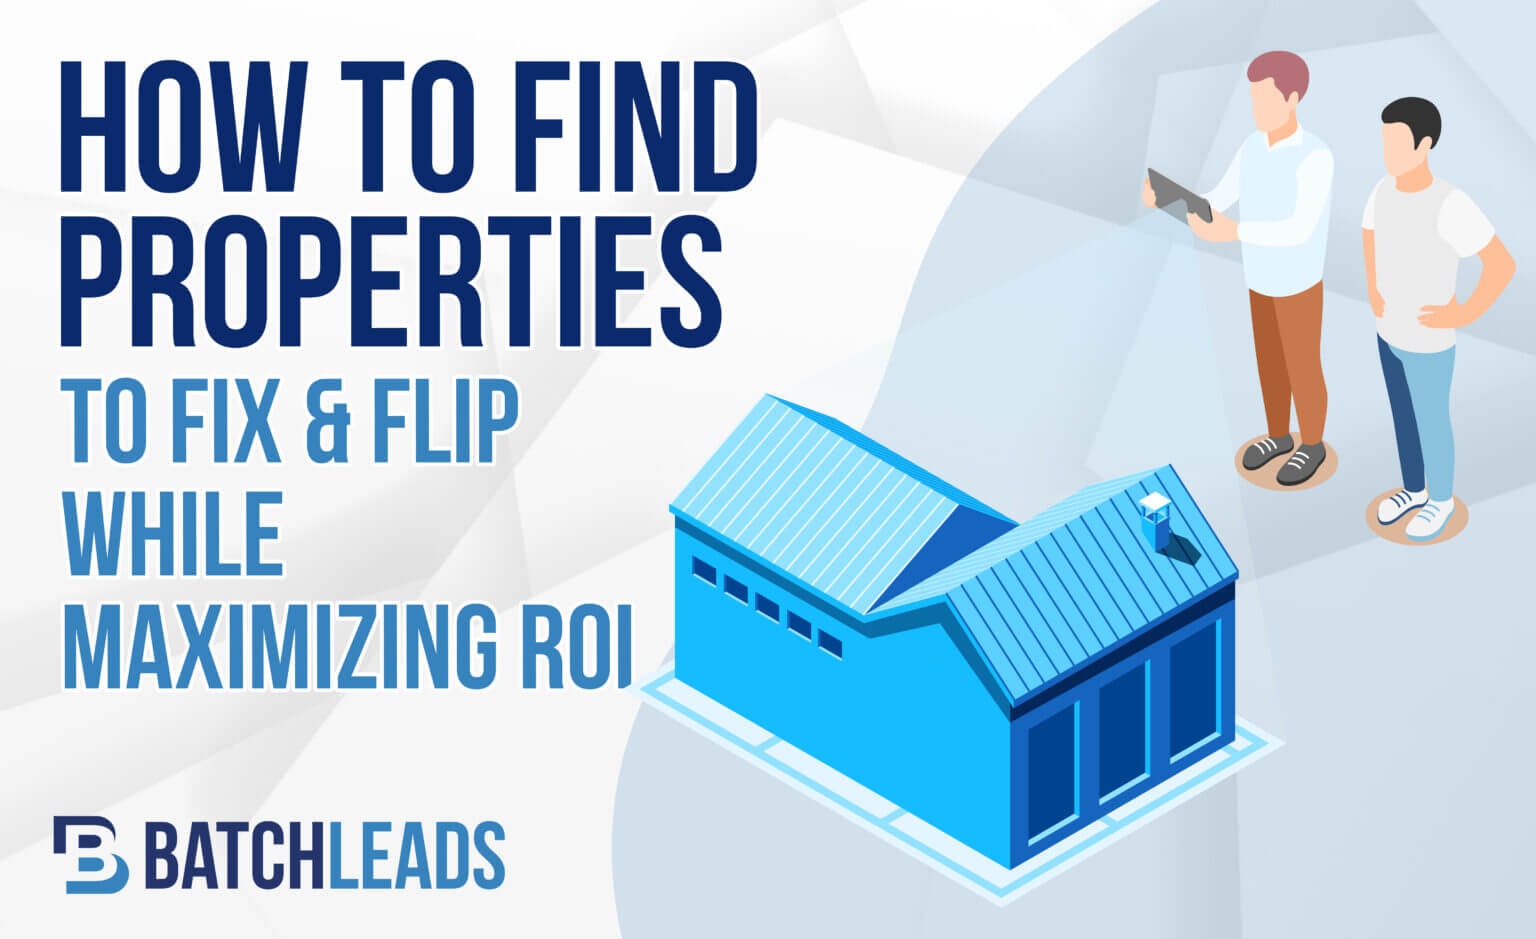 How To Find Properties To Fix and Flip While Maximizing ROI